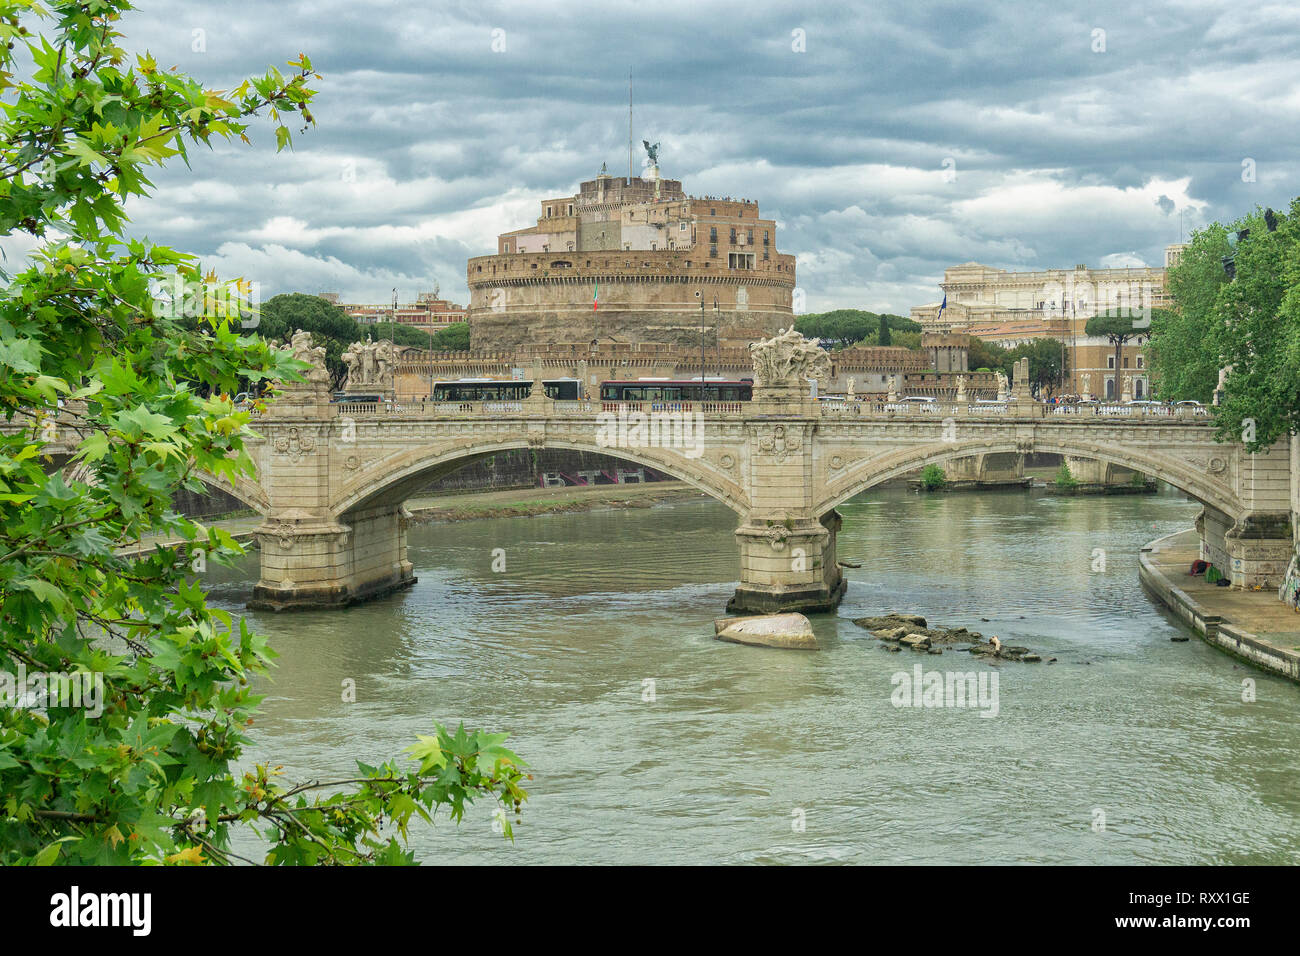 Tiber River in Rome with Castel Sant' Angelo in background. Stock Photo